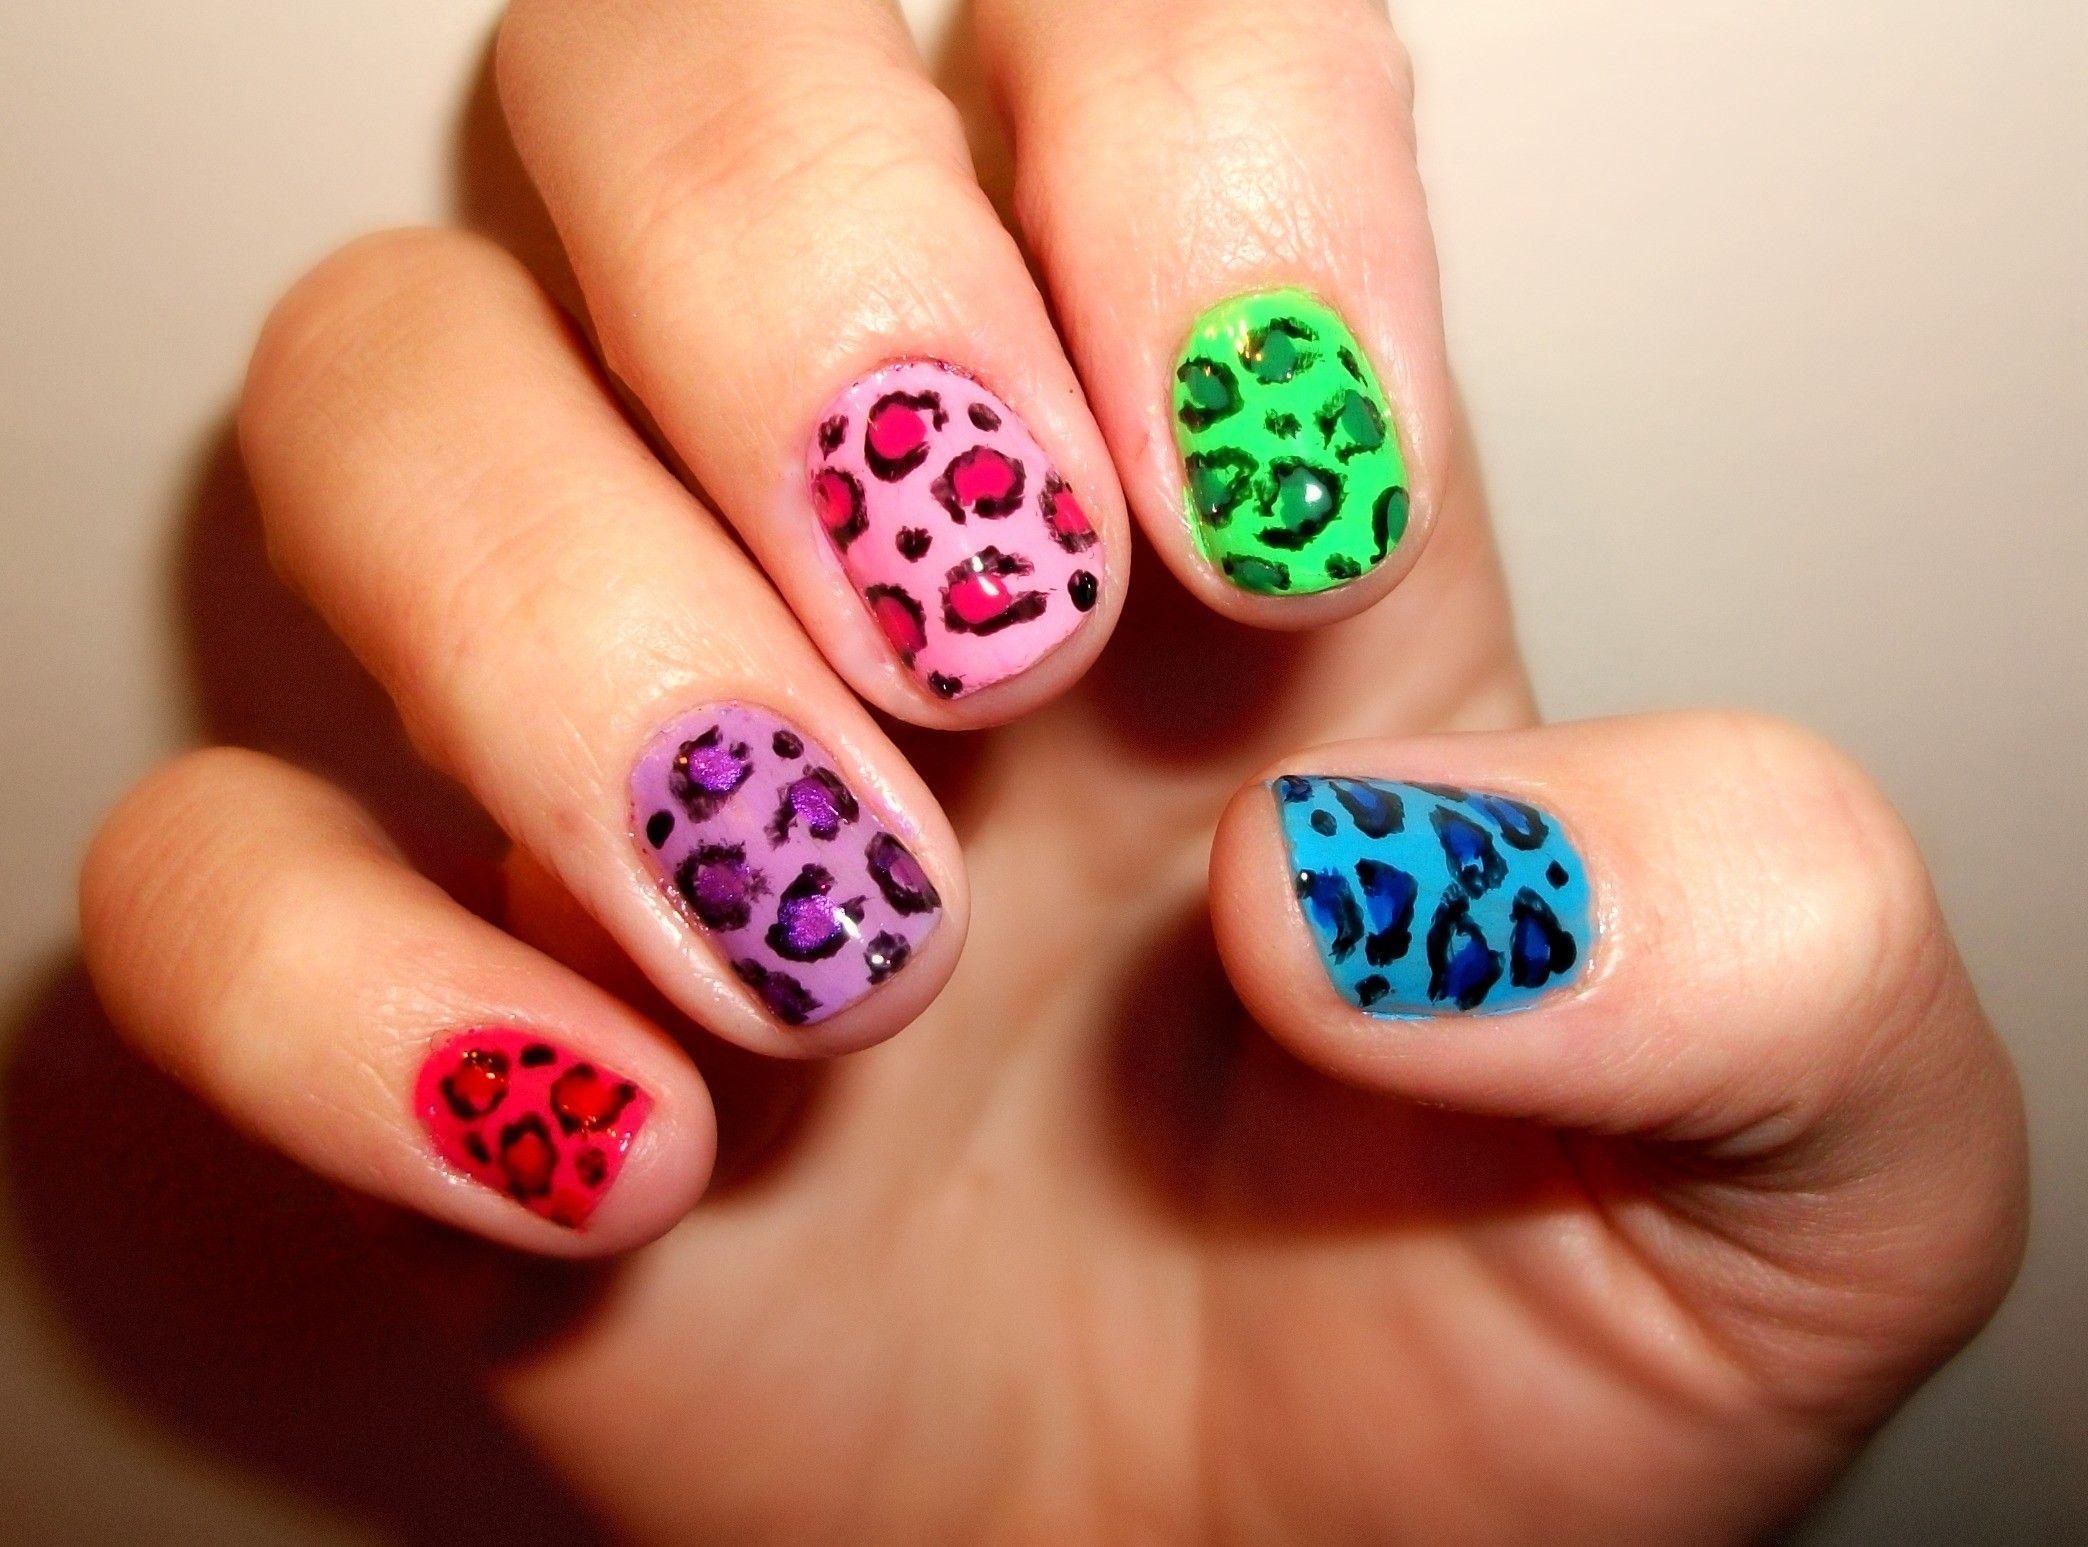 2. Top Free Nail Art Apps for Download - wide 3